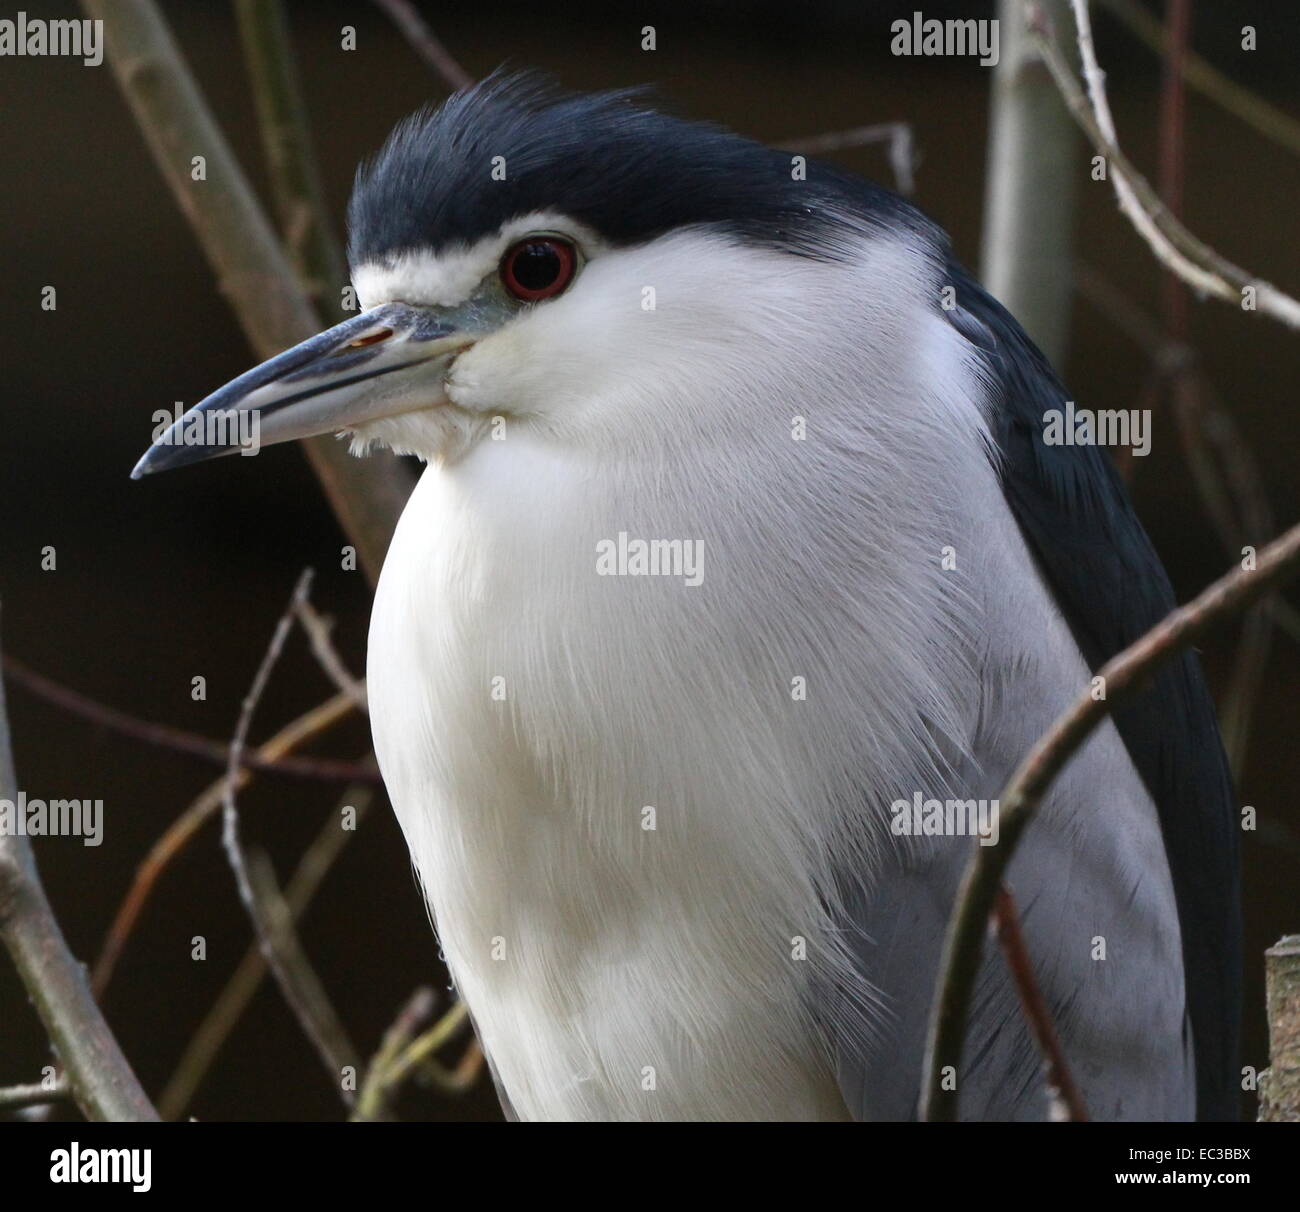 Black-crowned night heron (Nycticorax nycticorax) in a tree, close-up of  the head and upper body Stock Photo